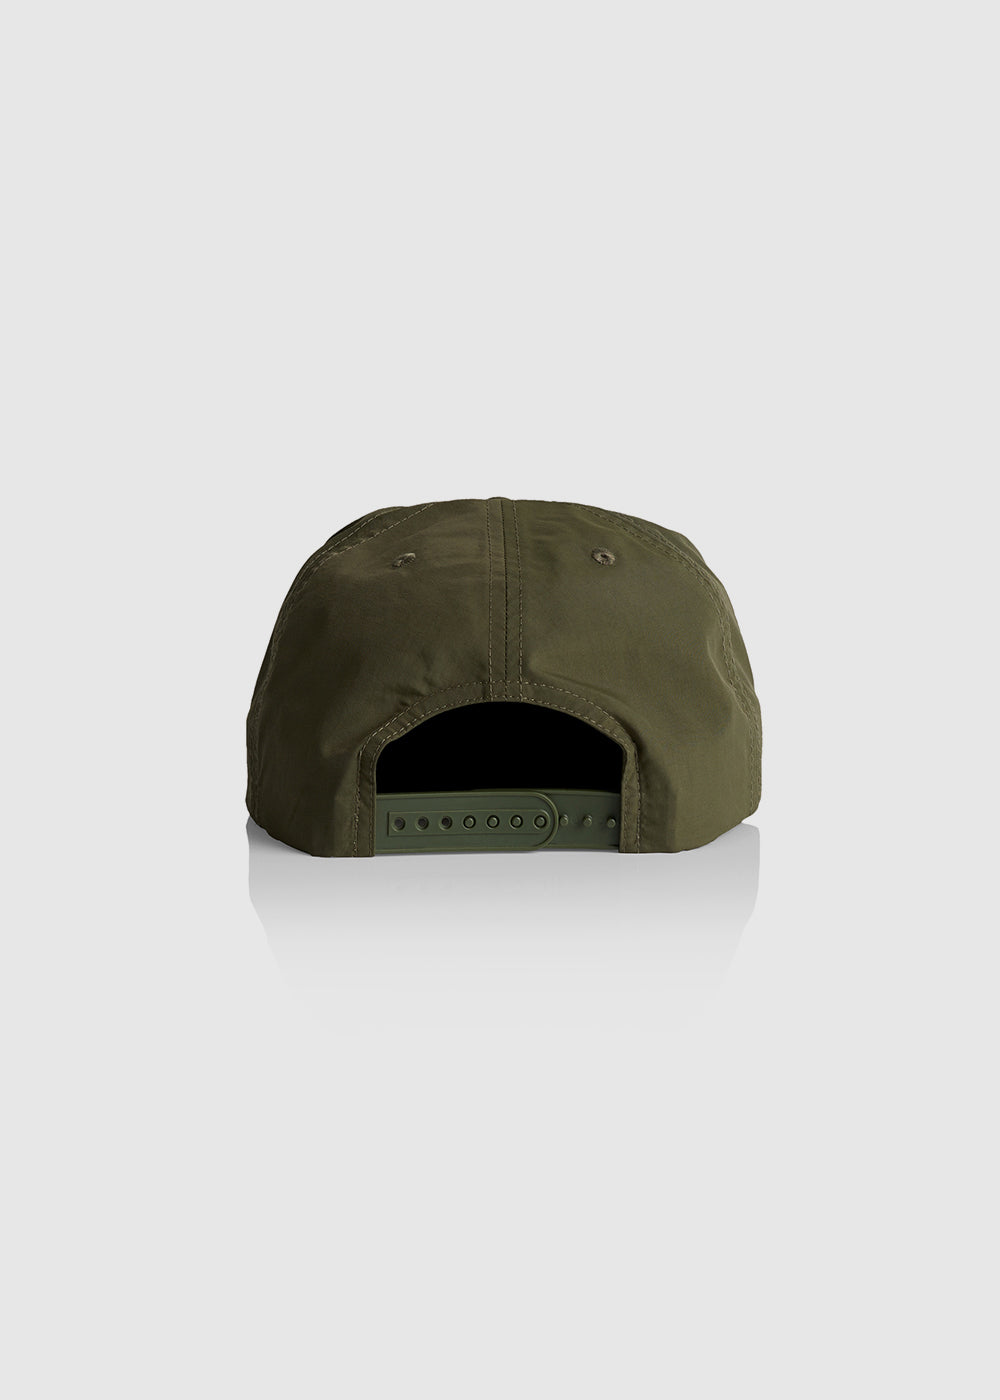 Surfing Capital Natural Canvas Hat - Headwear